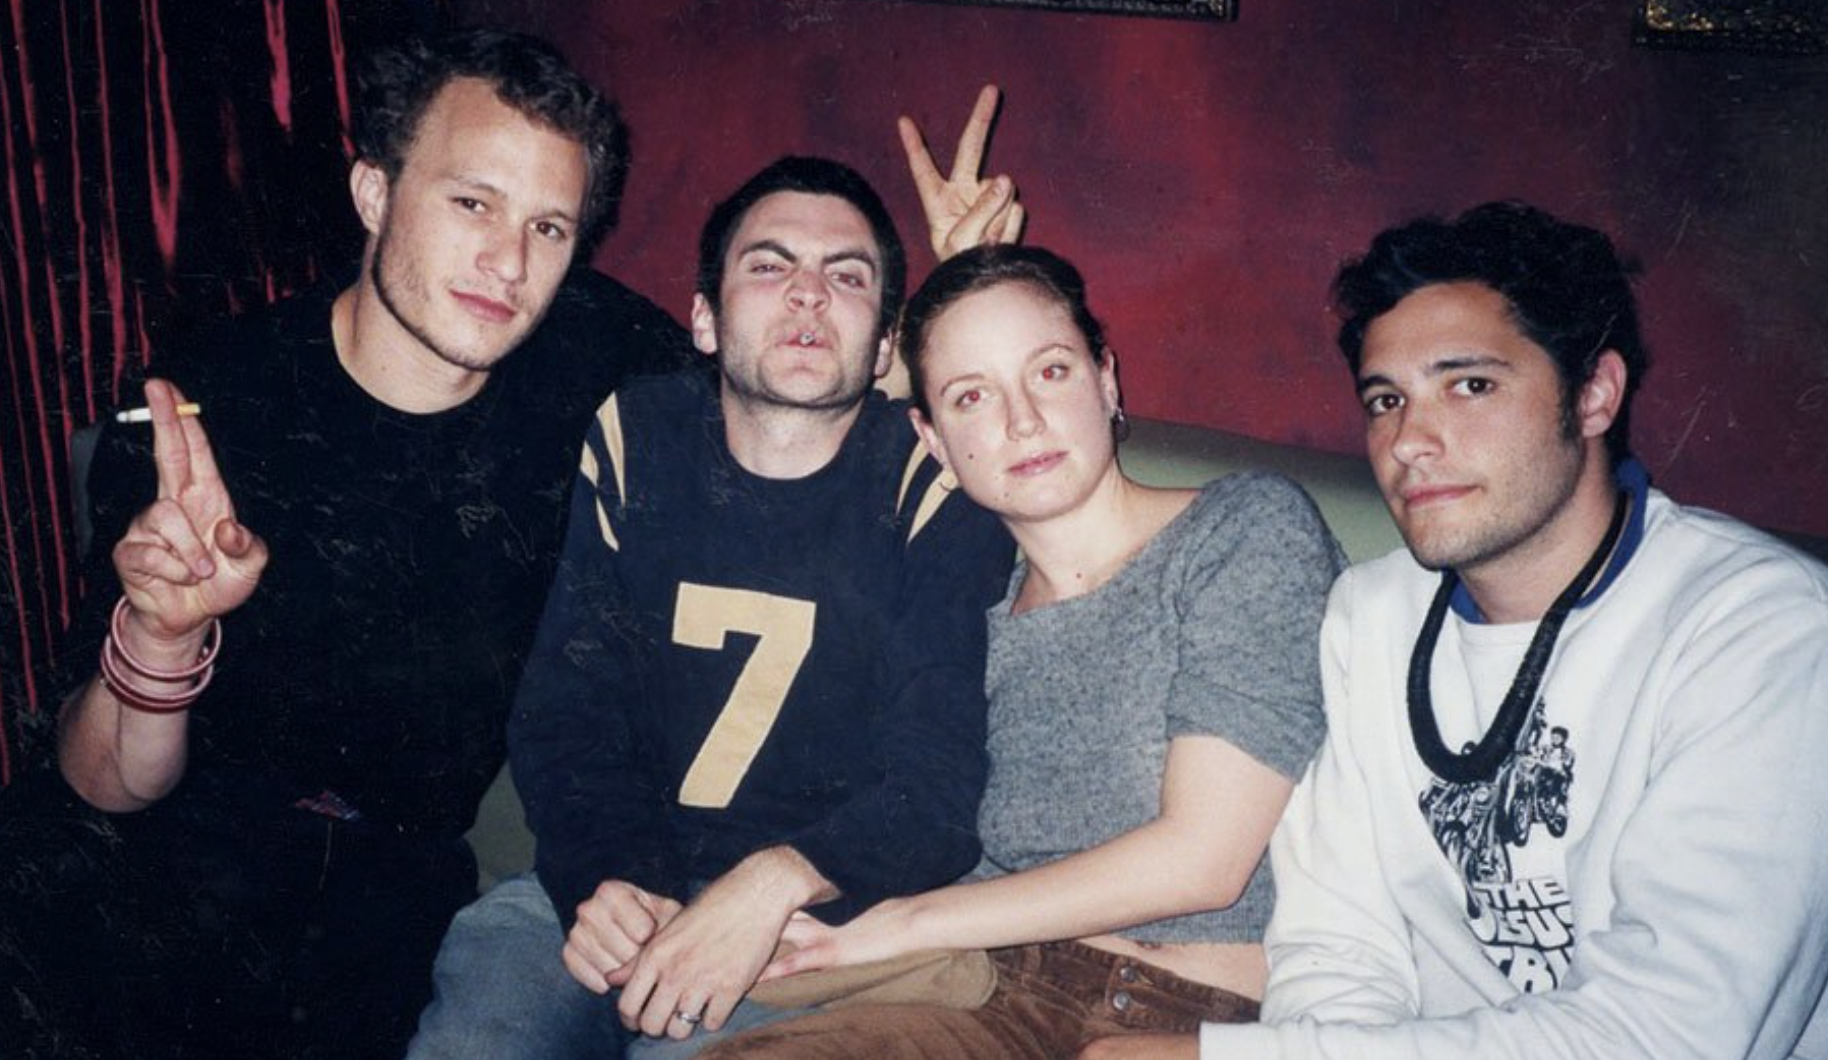 Wes and first wife Jennifer with Heath Ledger with friend George